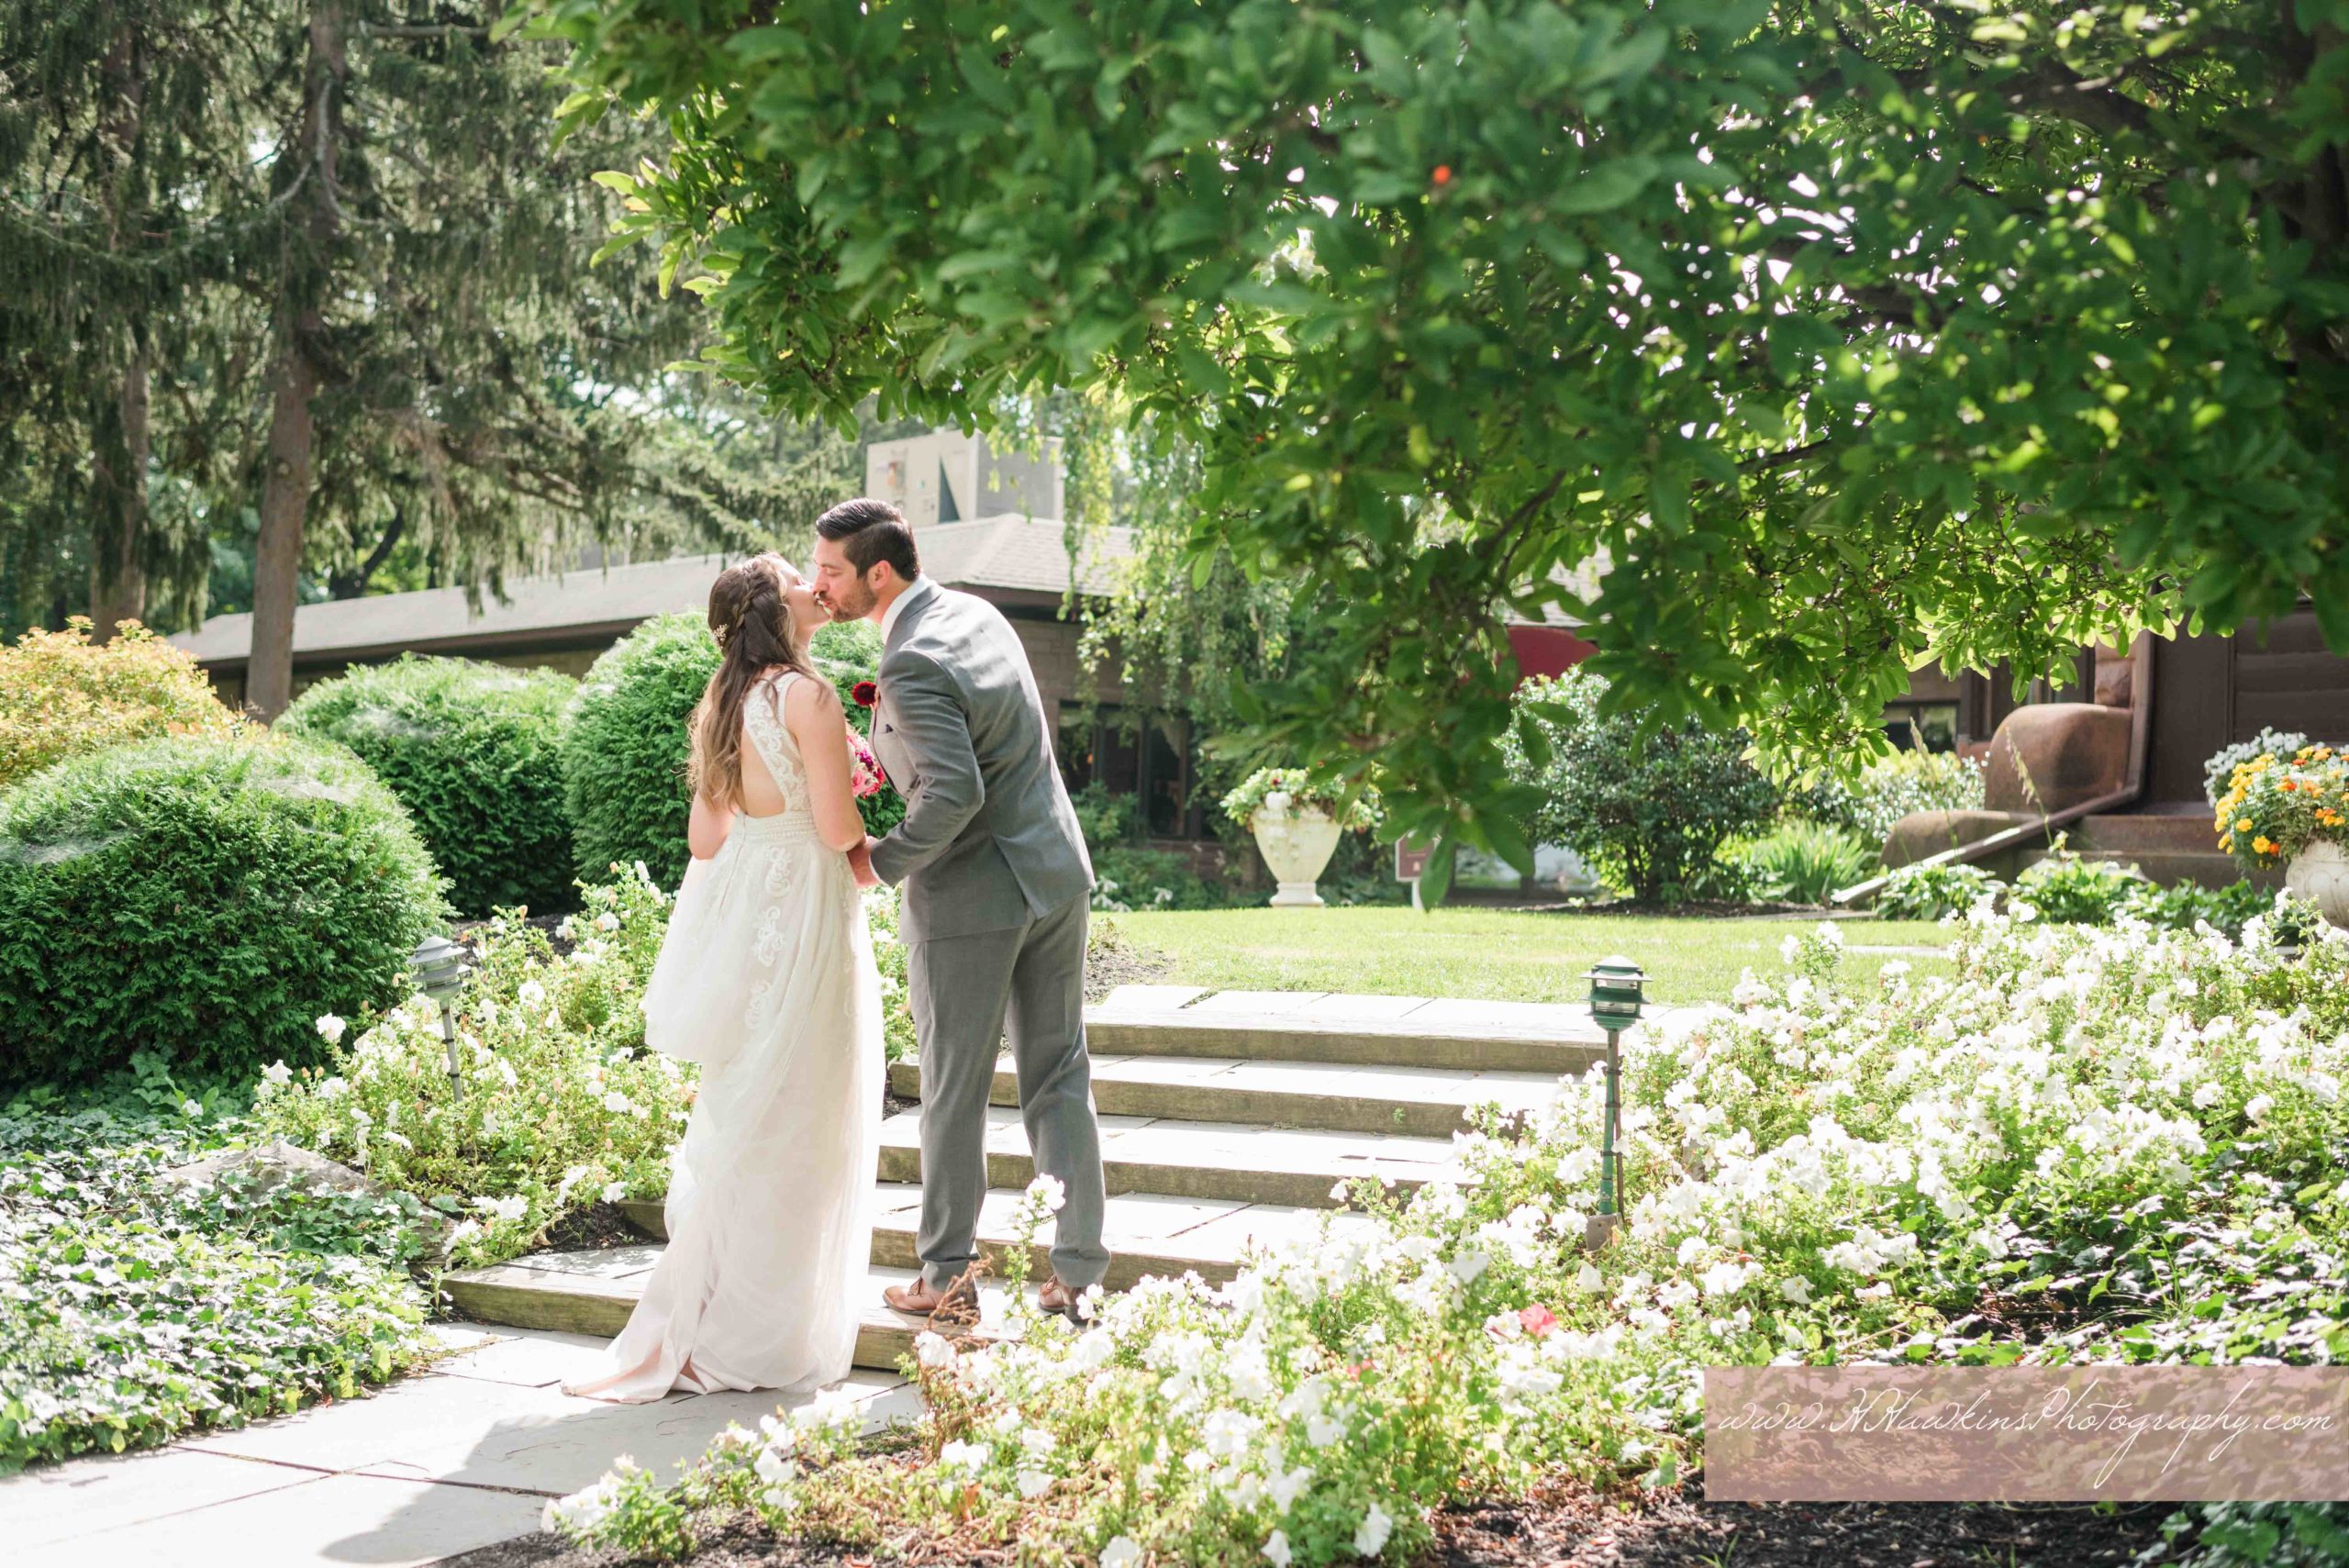 Groom and bride kiss on the steps on the back lawn of Belhurst Castle in GEneva NY